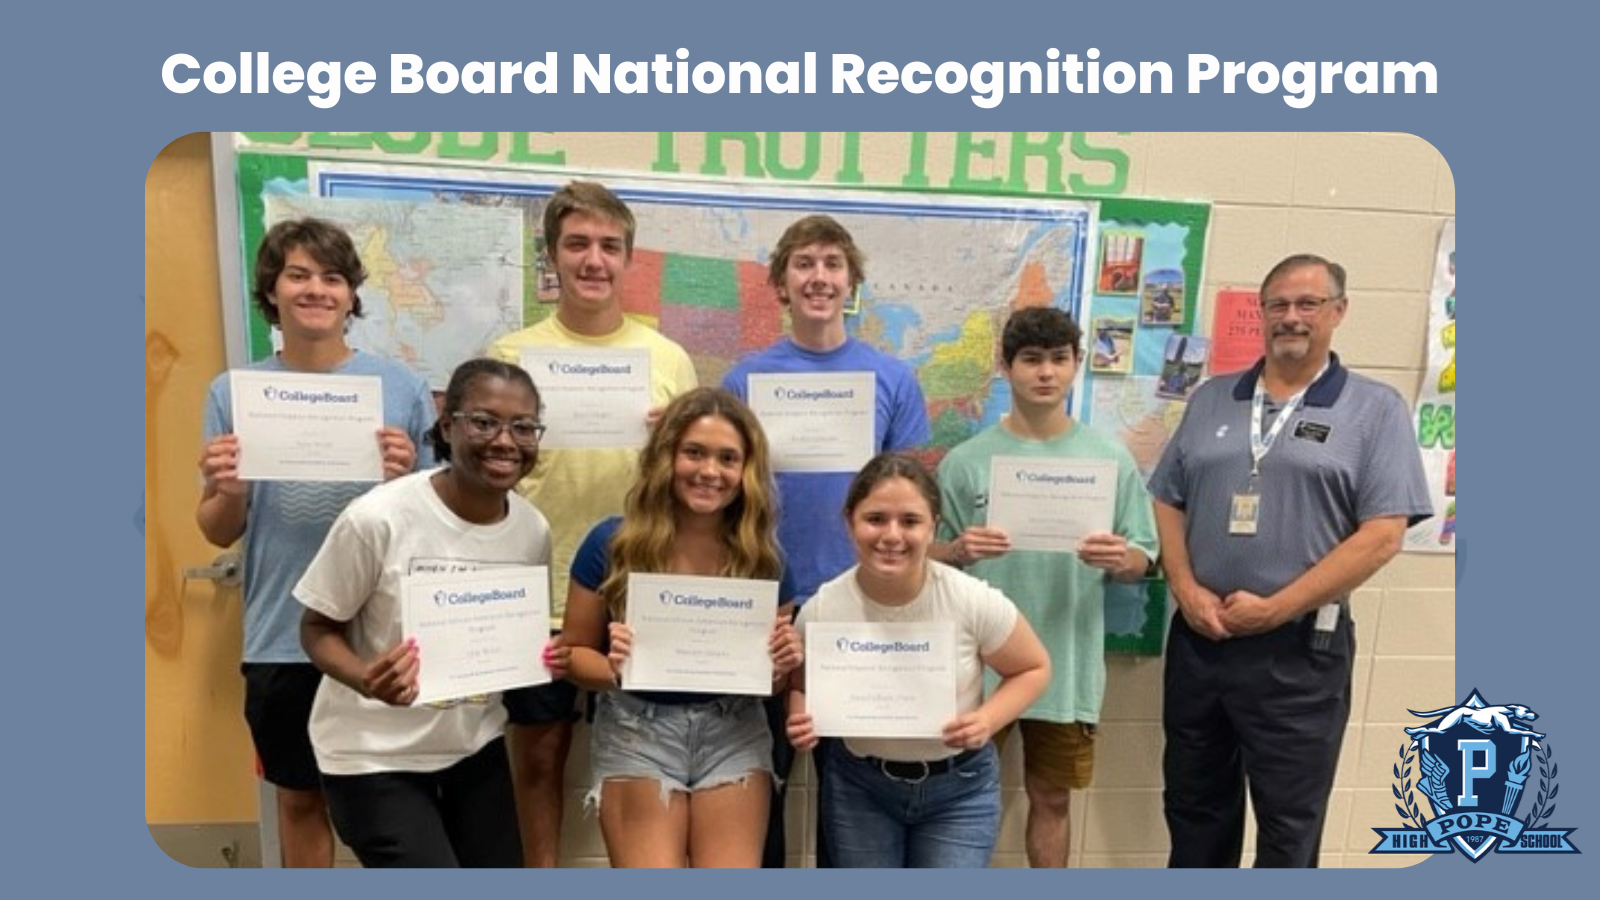 Students recognized by College Board with principal